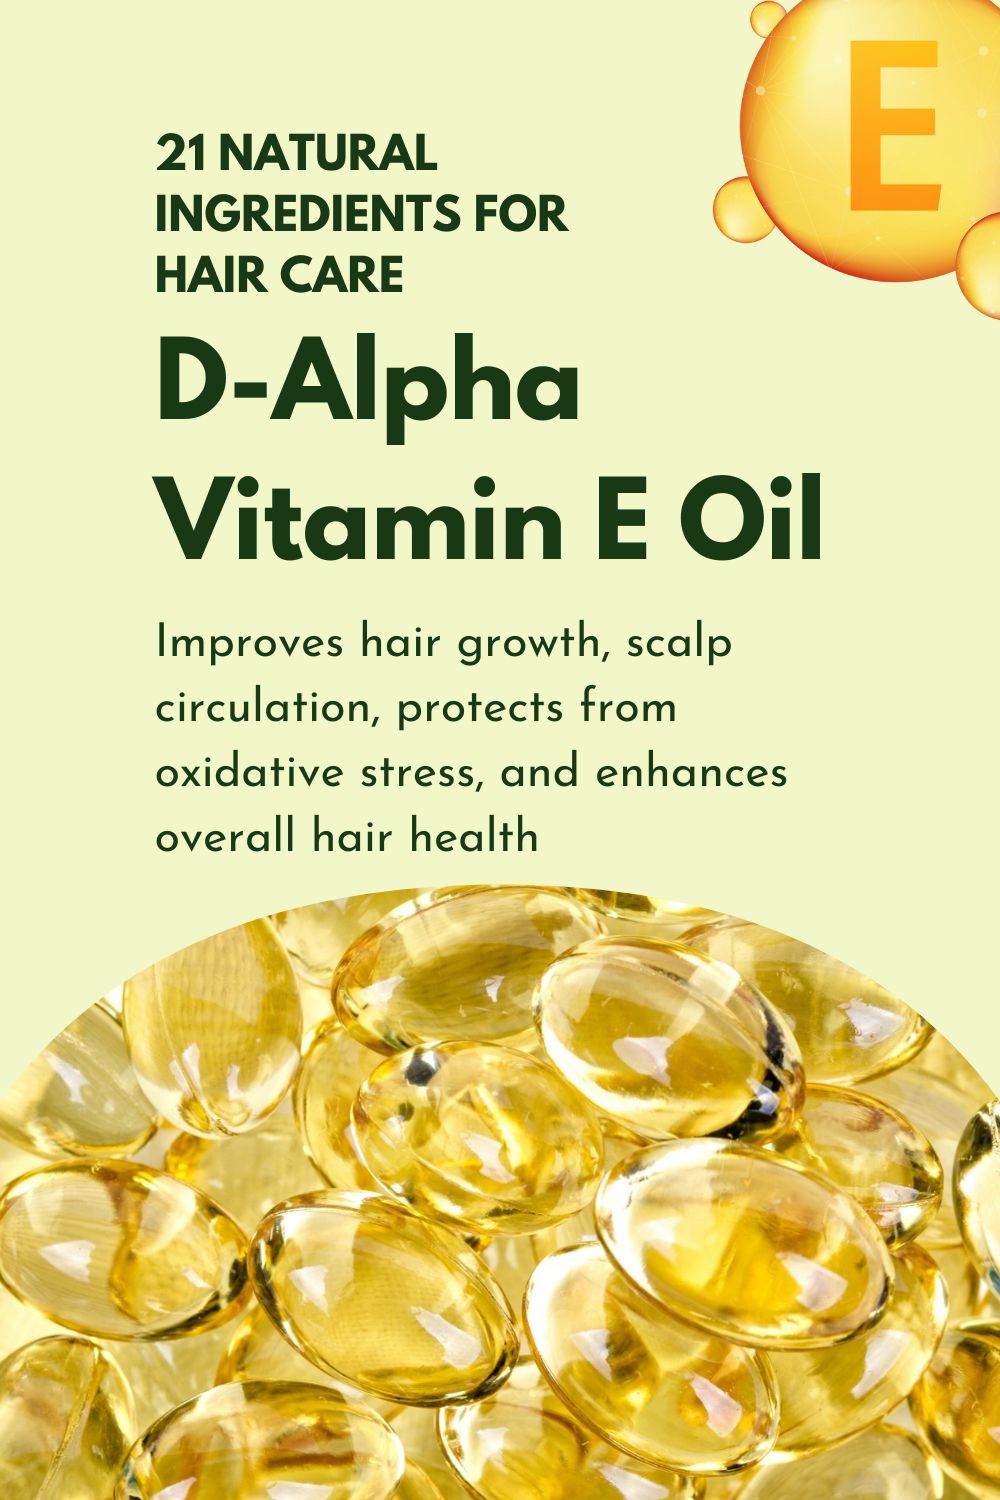 D-Alpha Vitamin E Oil - Improves hair growth, scalp circulation, protects from oxidative stress, and enhances overall hair health